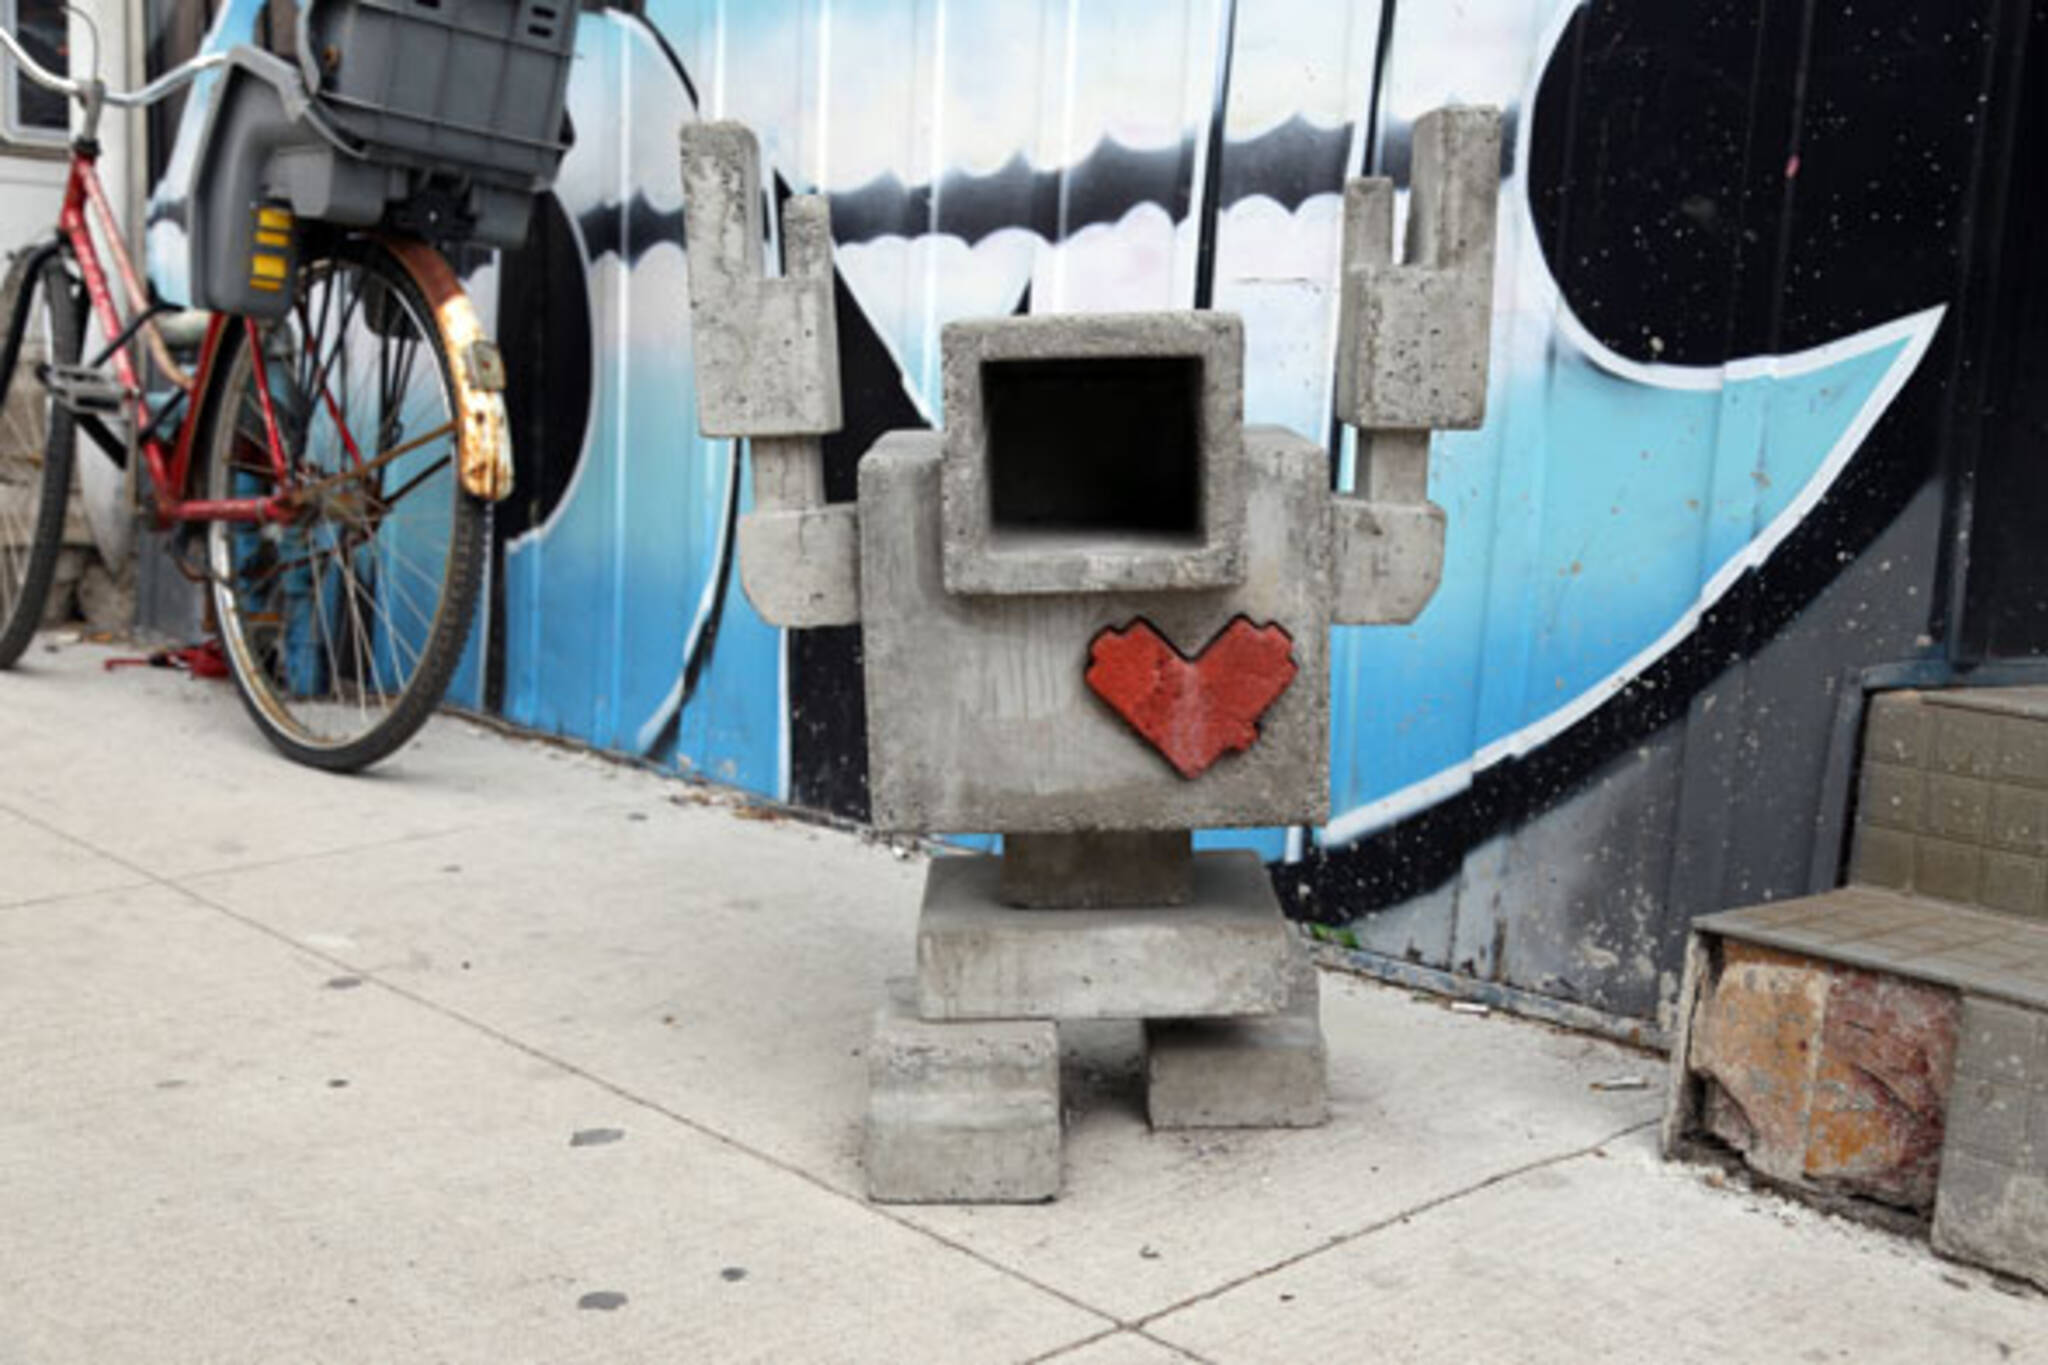 100 Lovebots take to the streets of Toronto